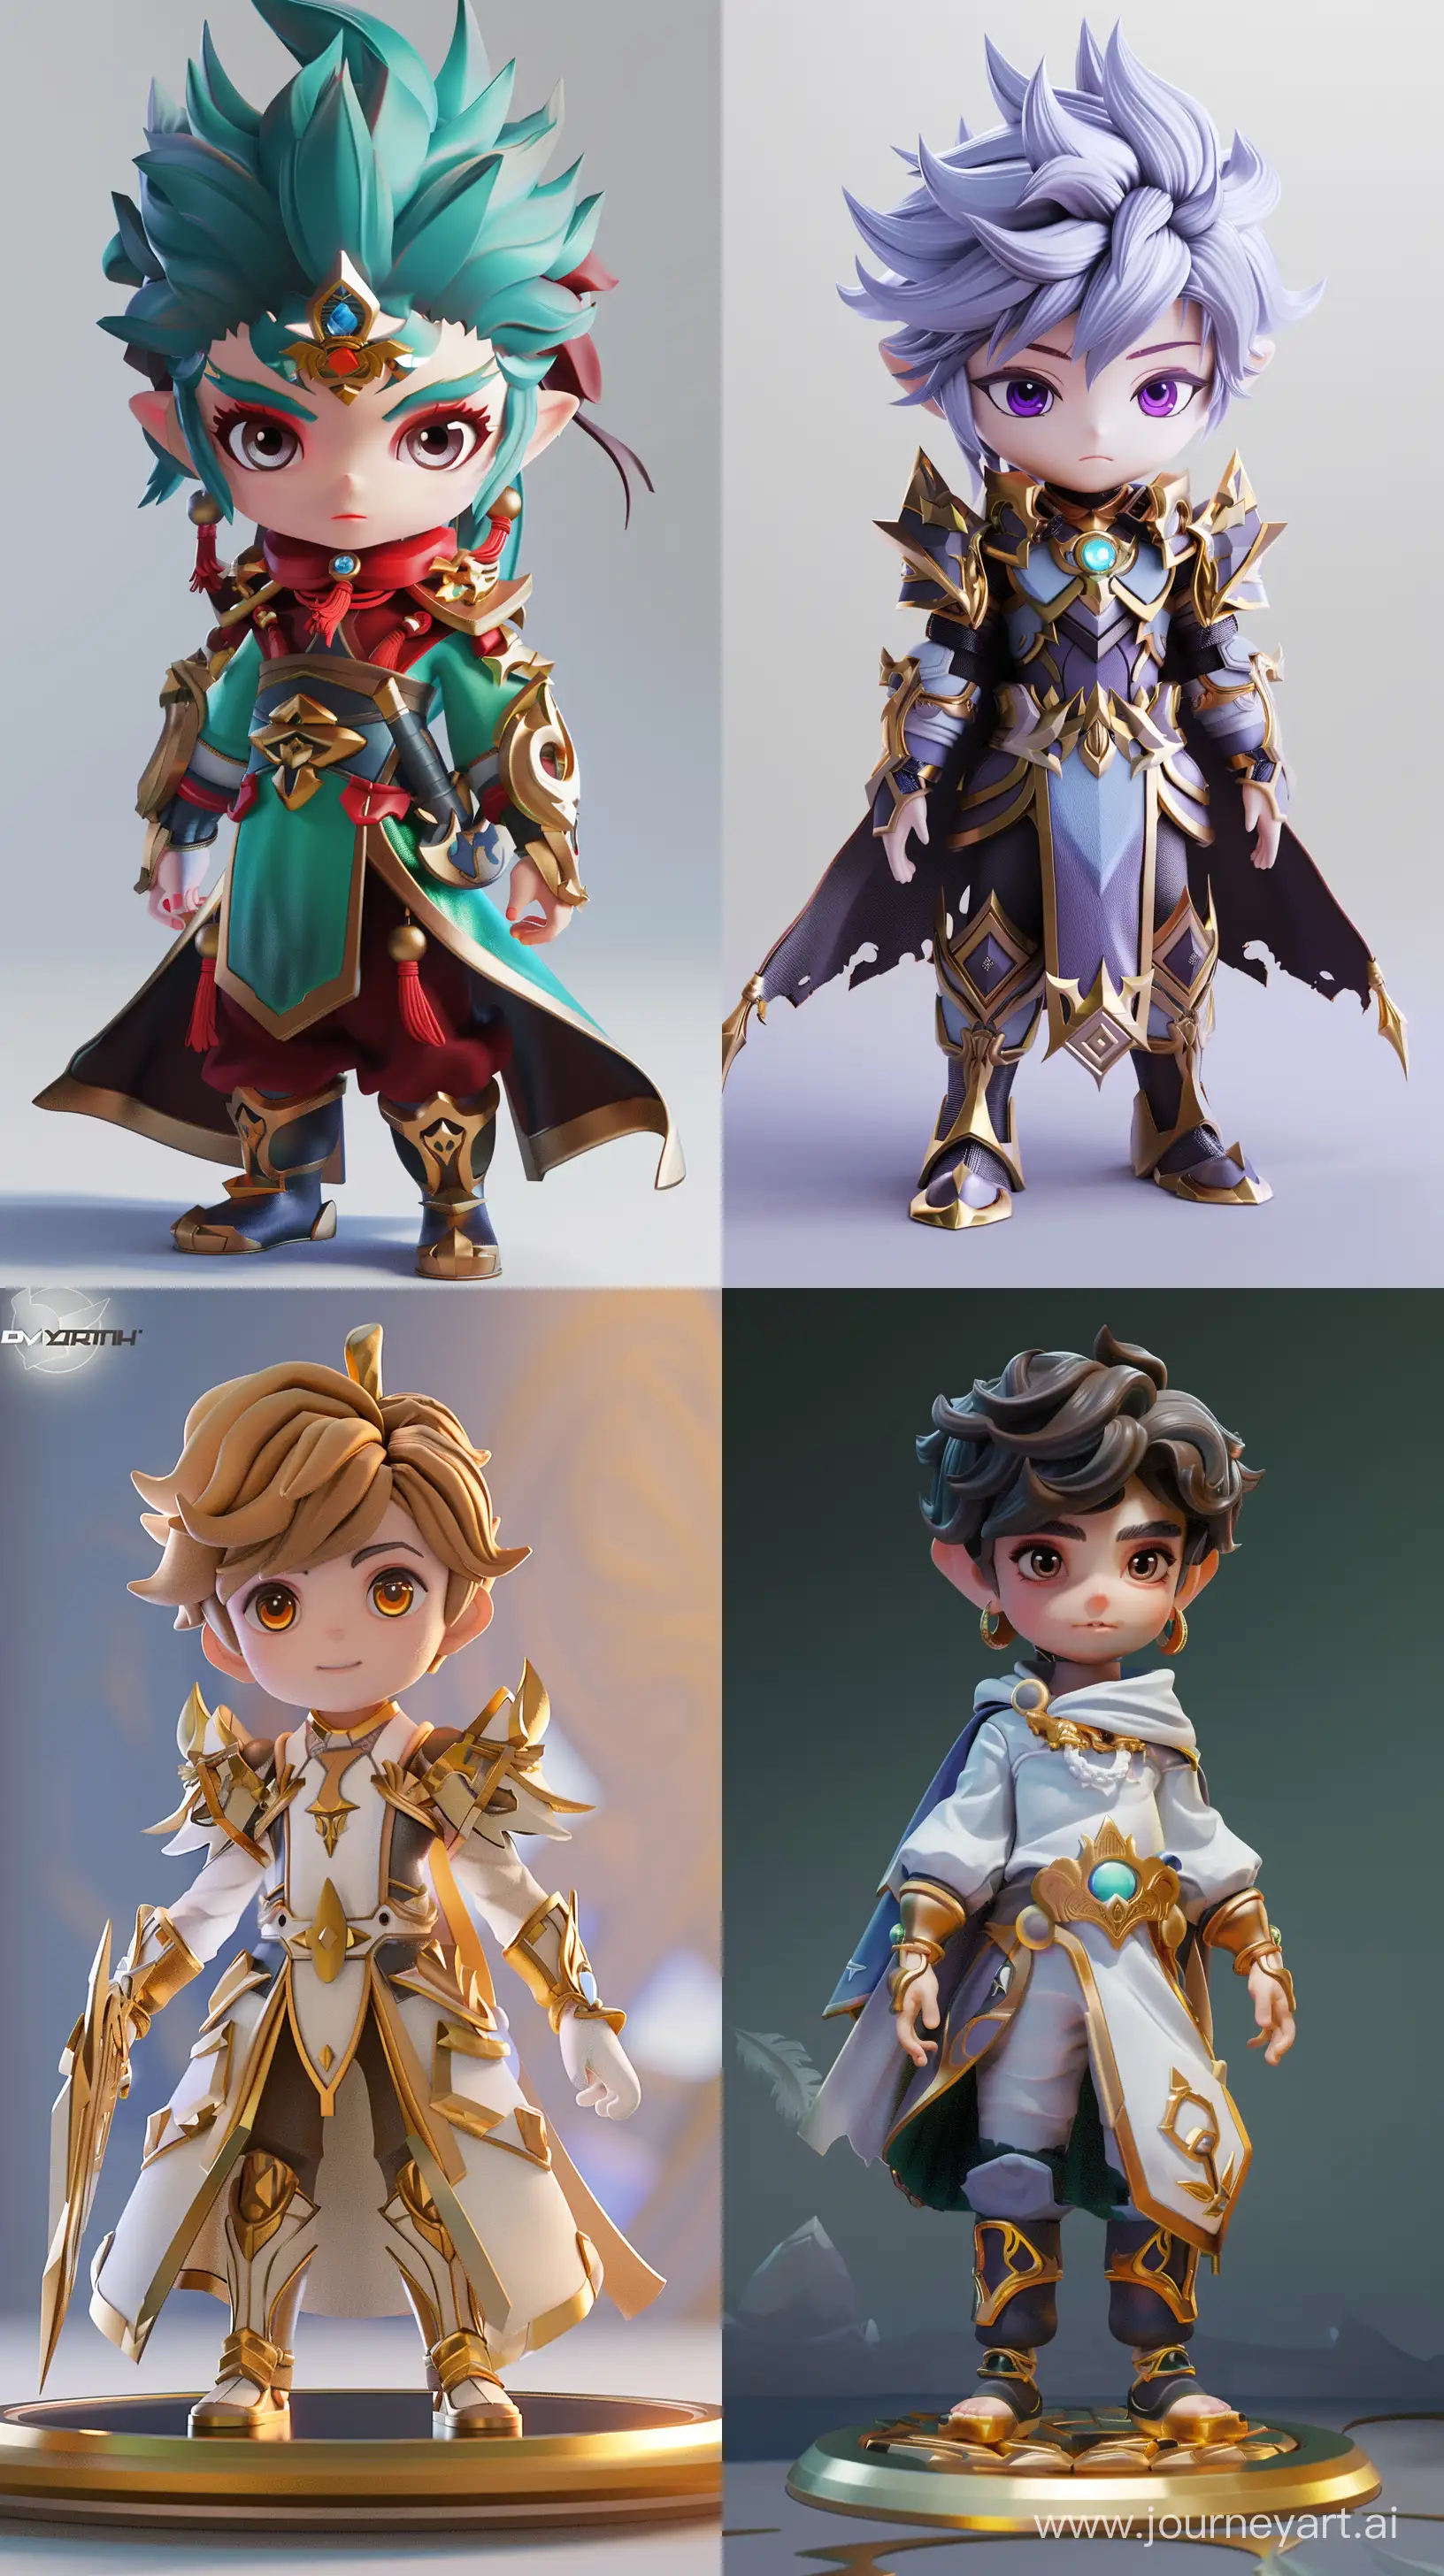 Cute-3D-Character-Animation-of-Dyrroth-from-Mobile-Legends-in-Prince-of-Abyss-Skin